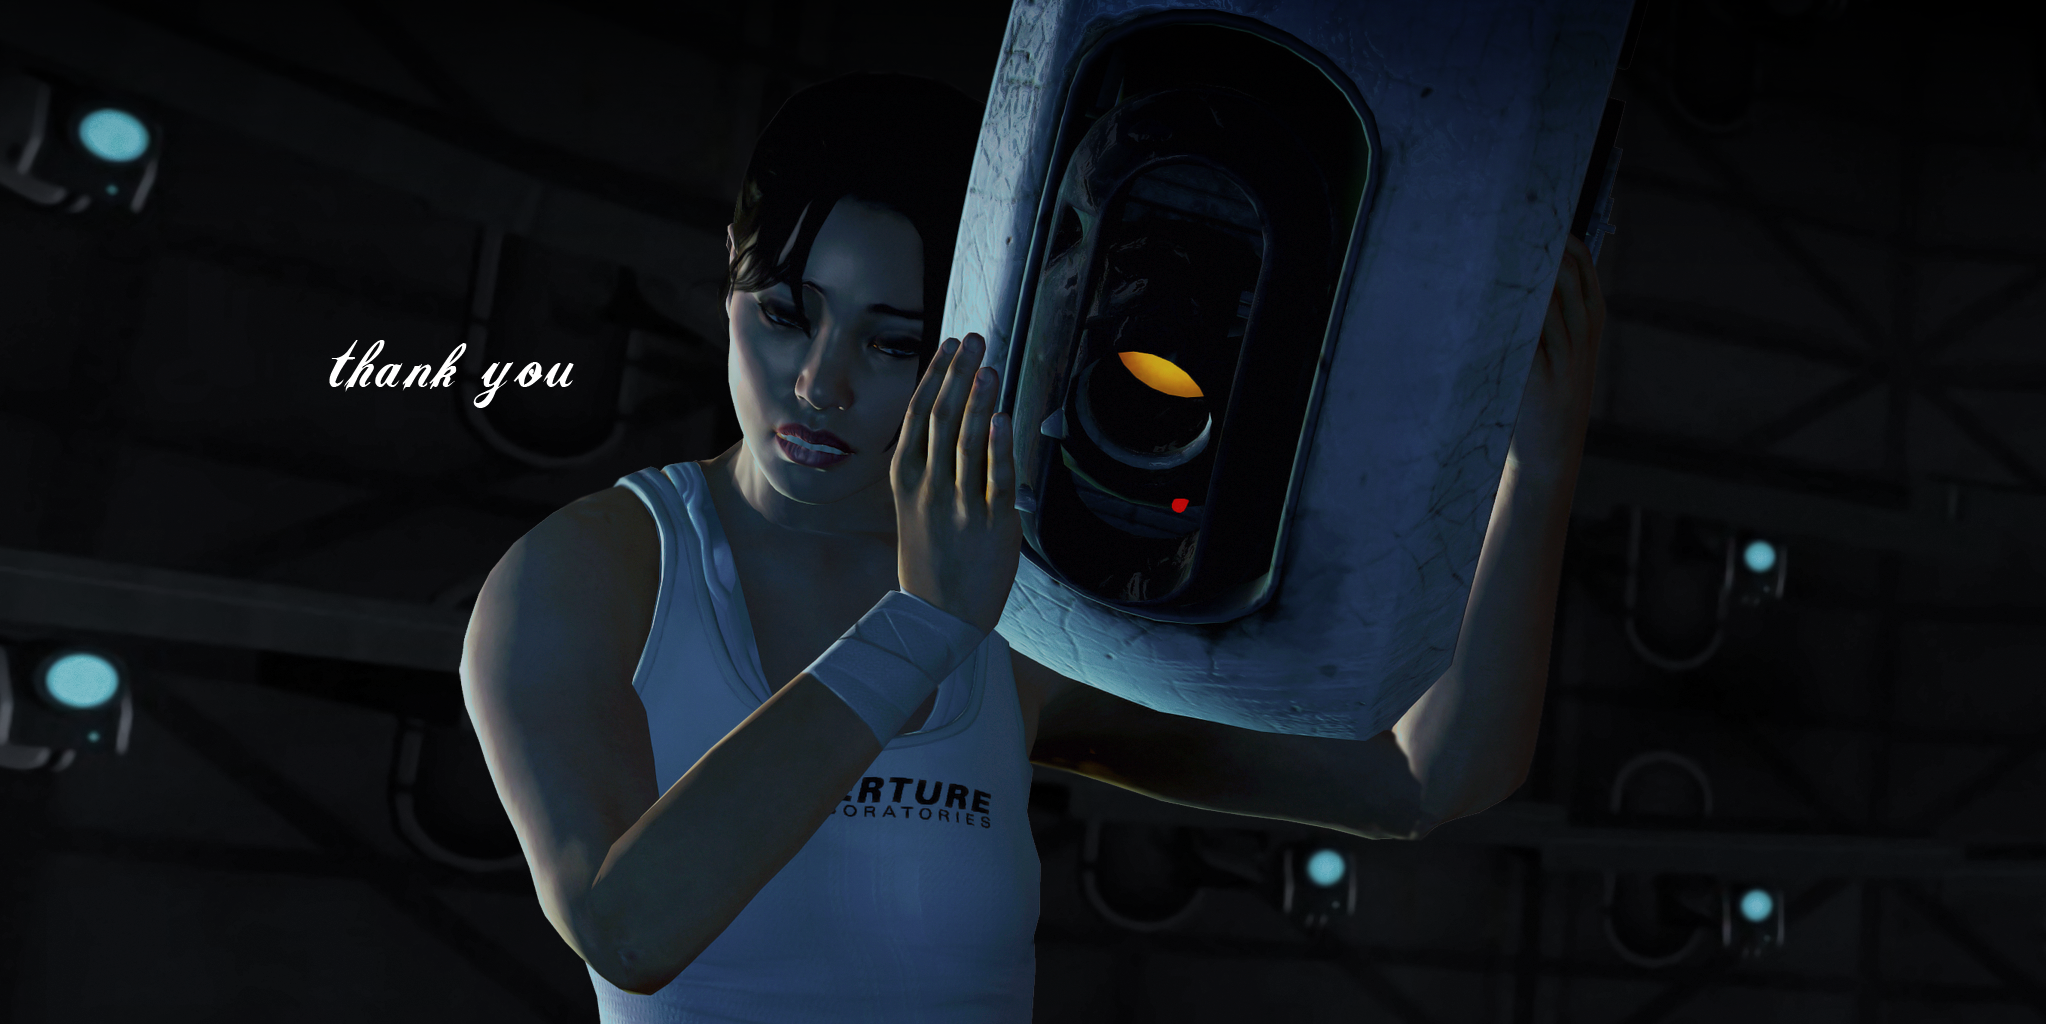 Chell and GLaDOS Wallpaper by Nightfable on